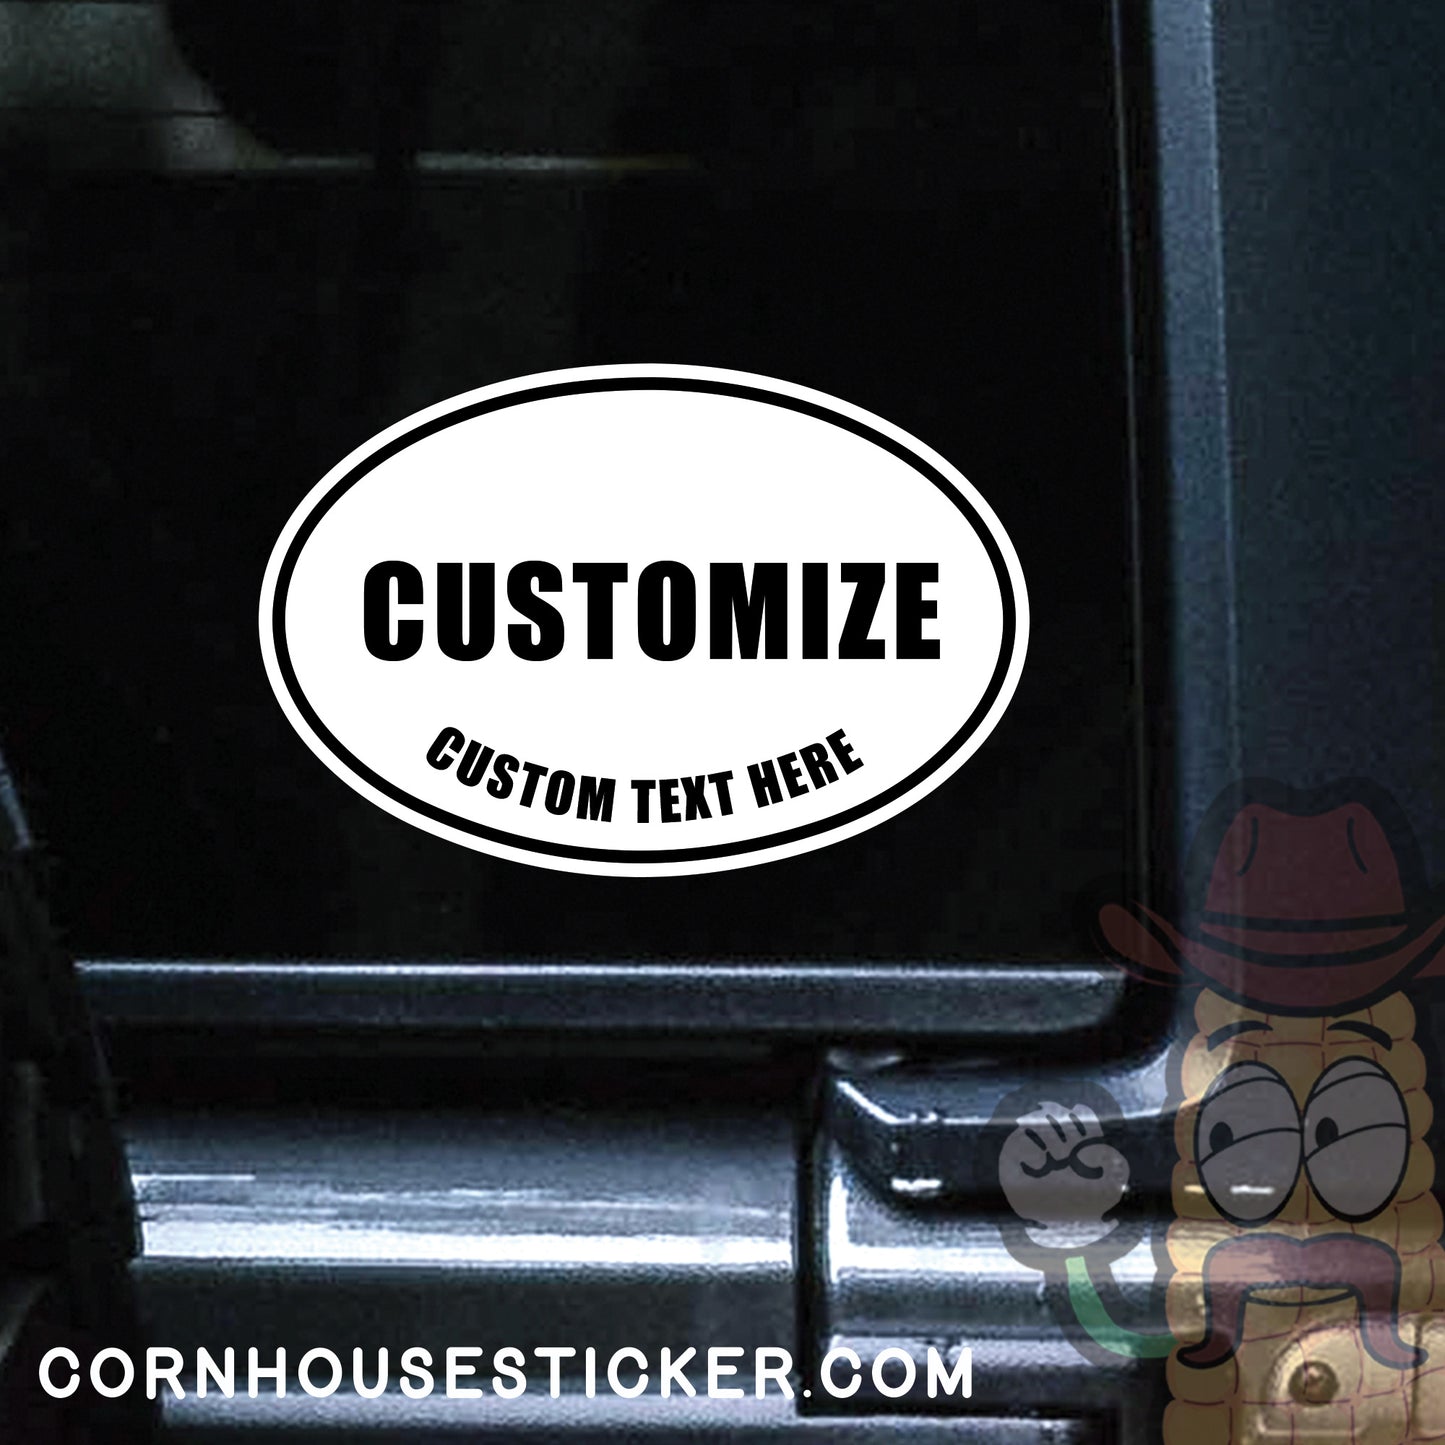 Customize oval travel sticker Made in Norwich,CT